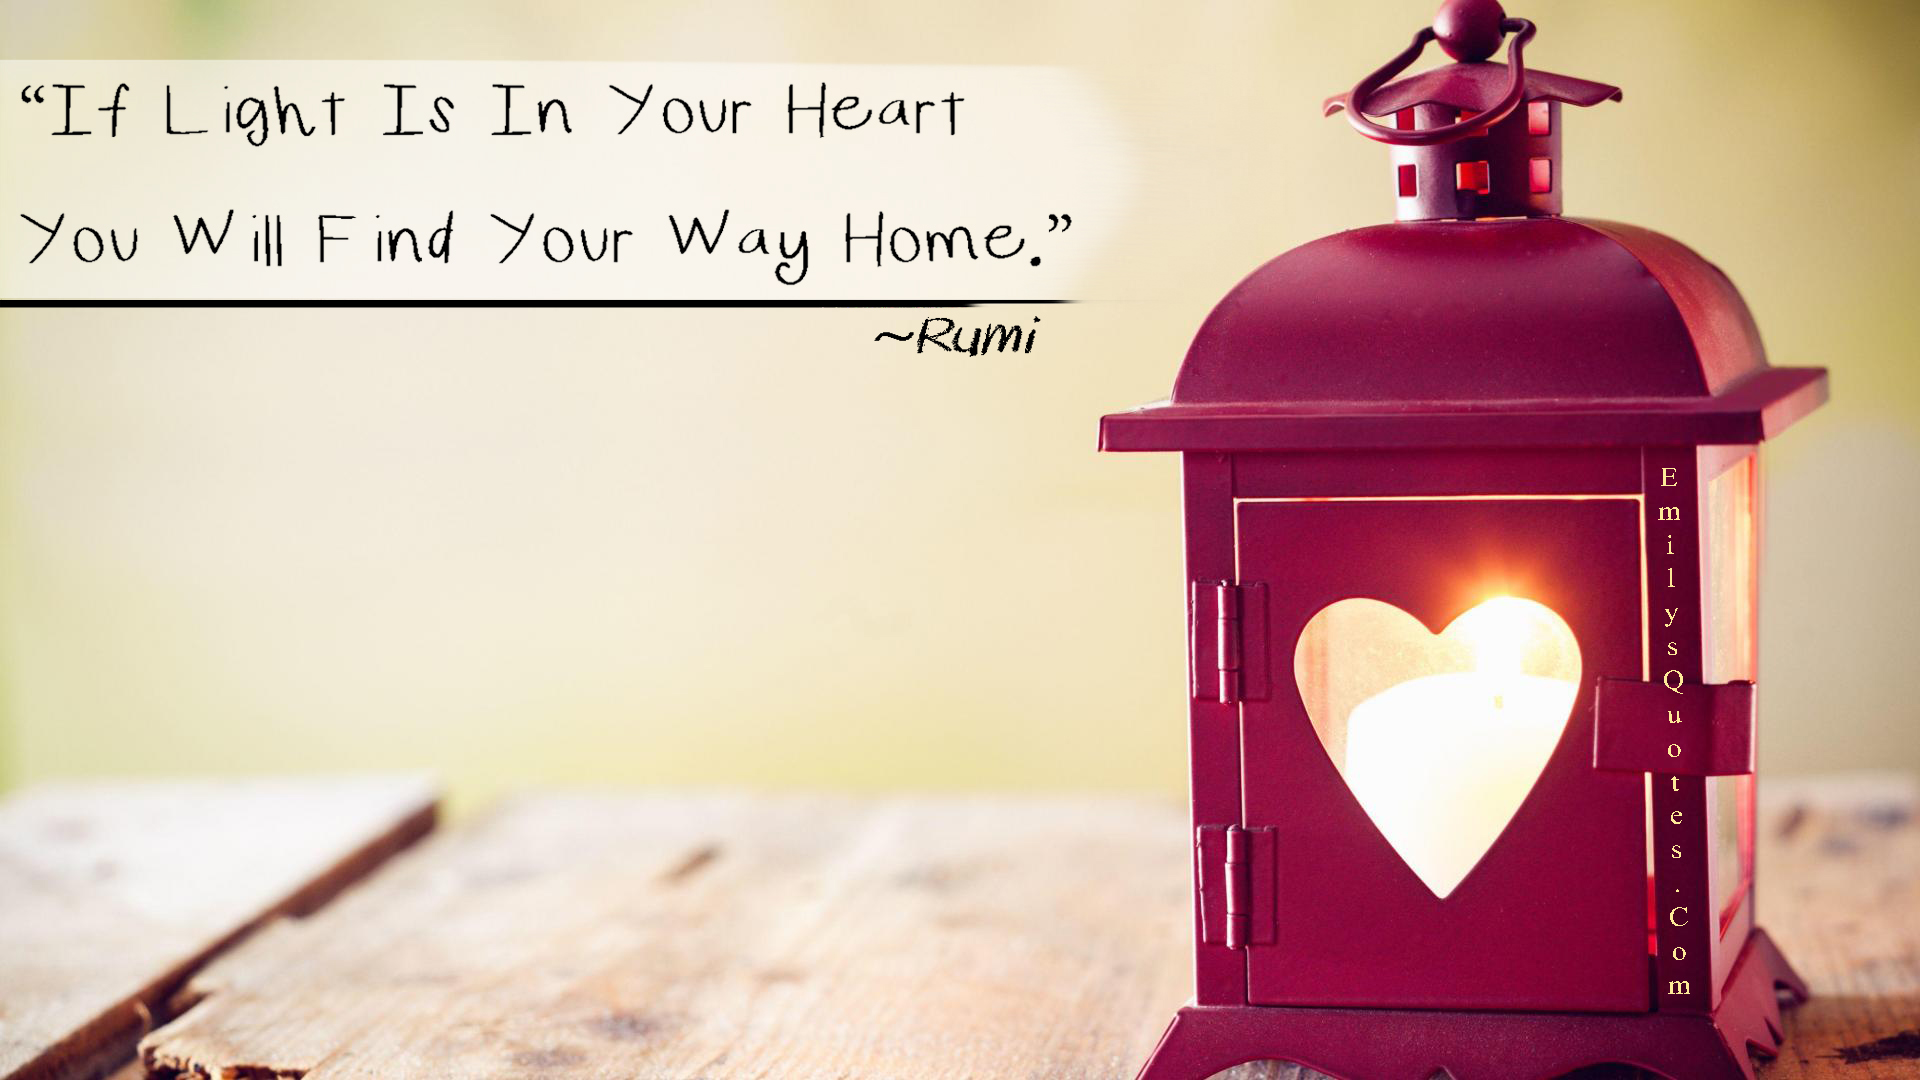 If light is in your heart, you will find your way Home